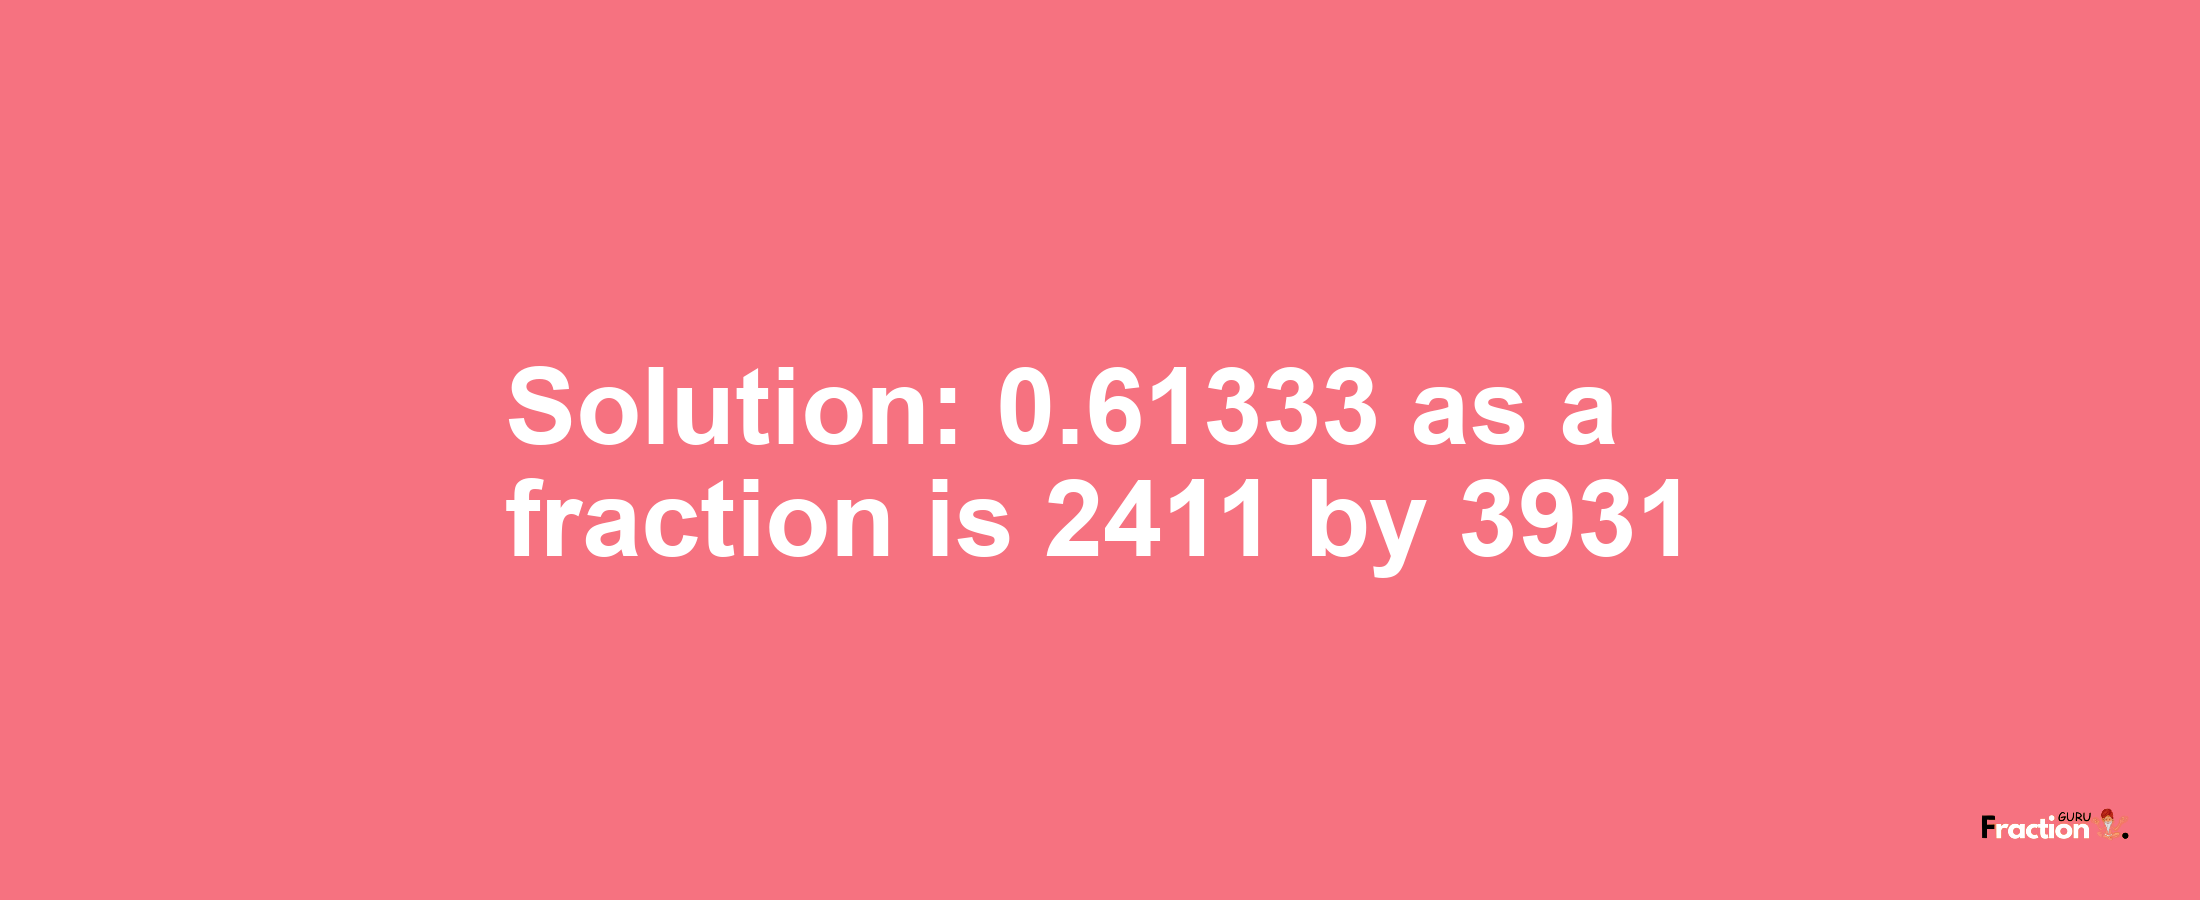 Solution:0.61333 as a fraction is 2411/3931